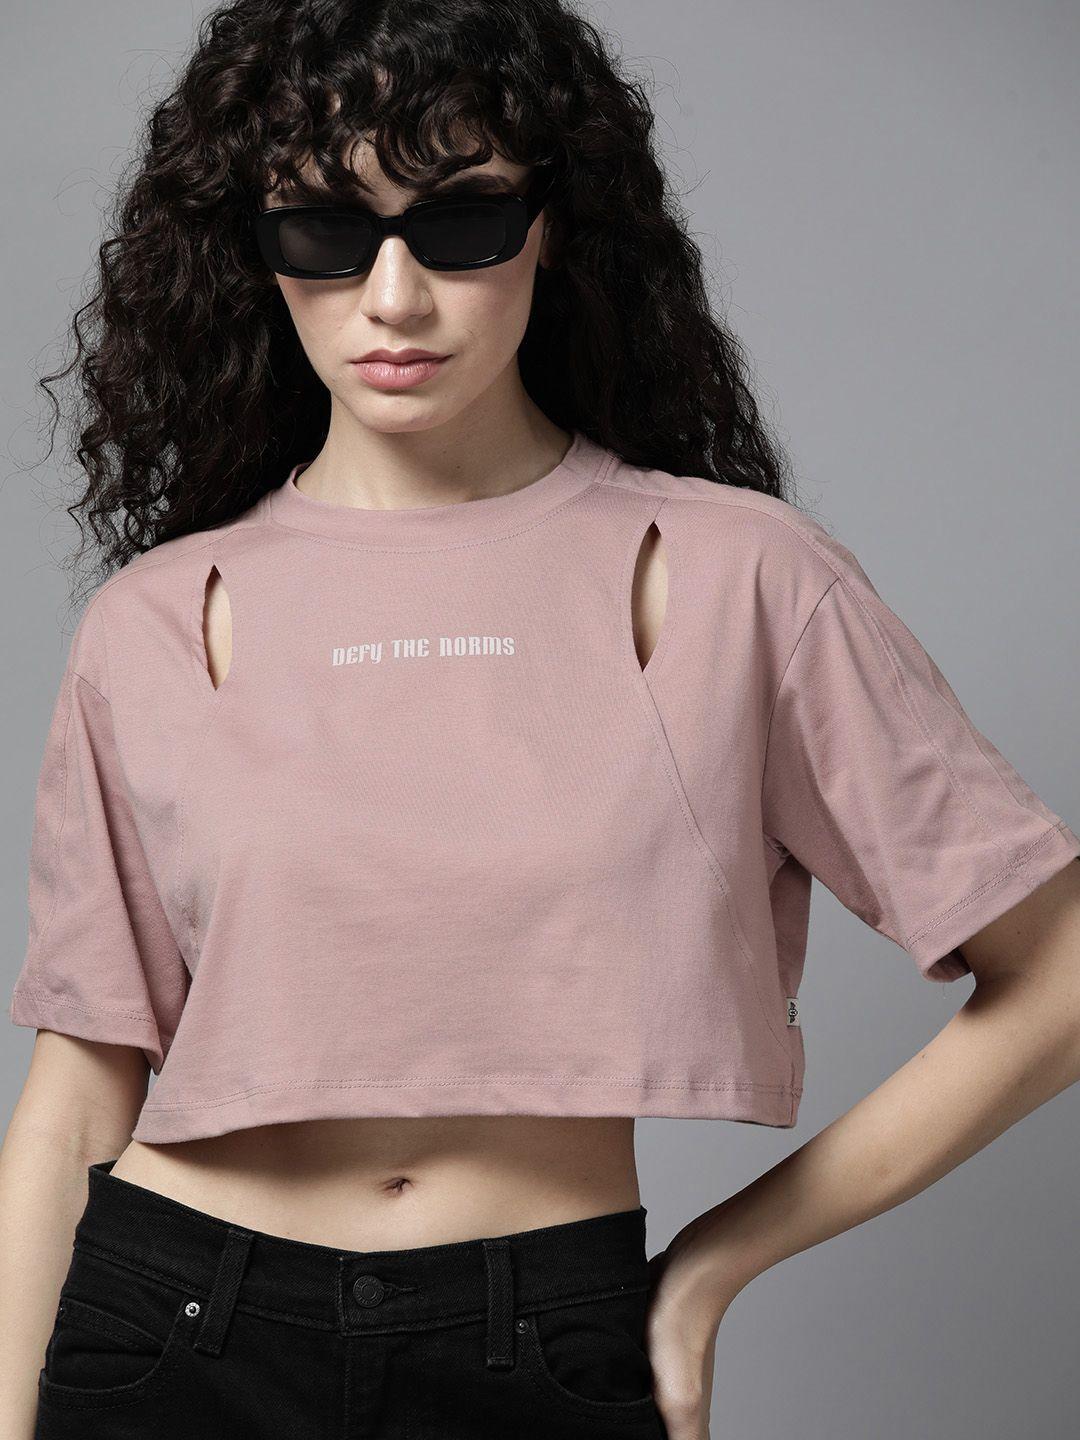 the roadster lifestyle co. drop-shoulder cut-out detail boxy t-shirt